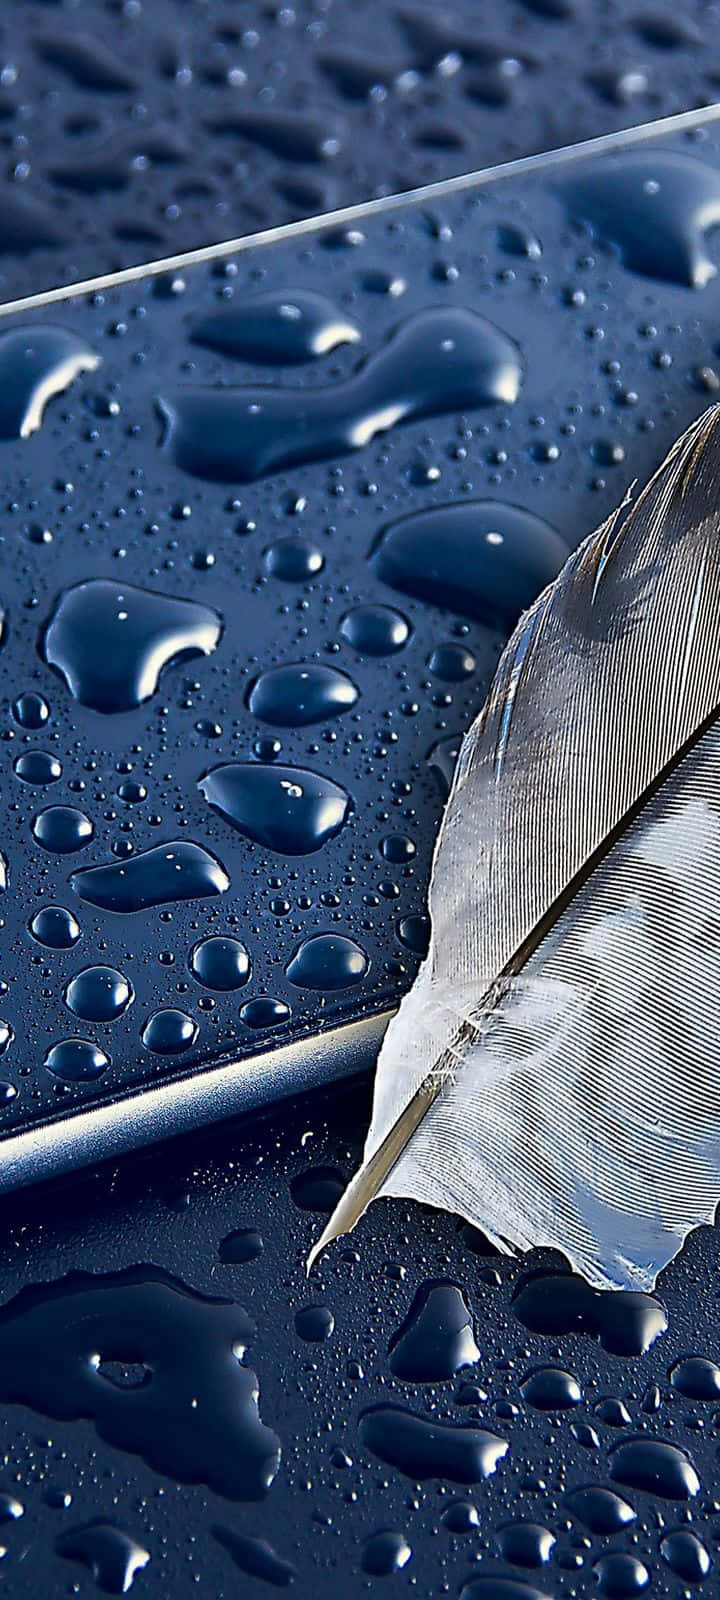 Raindrops And A Leaf That Is Very Handy Wallpaper